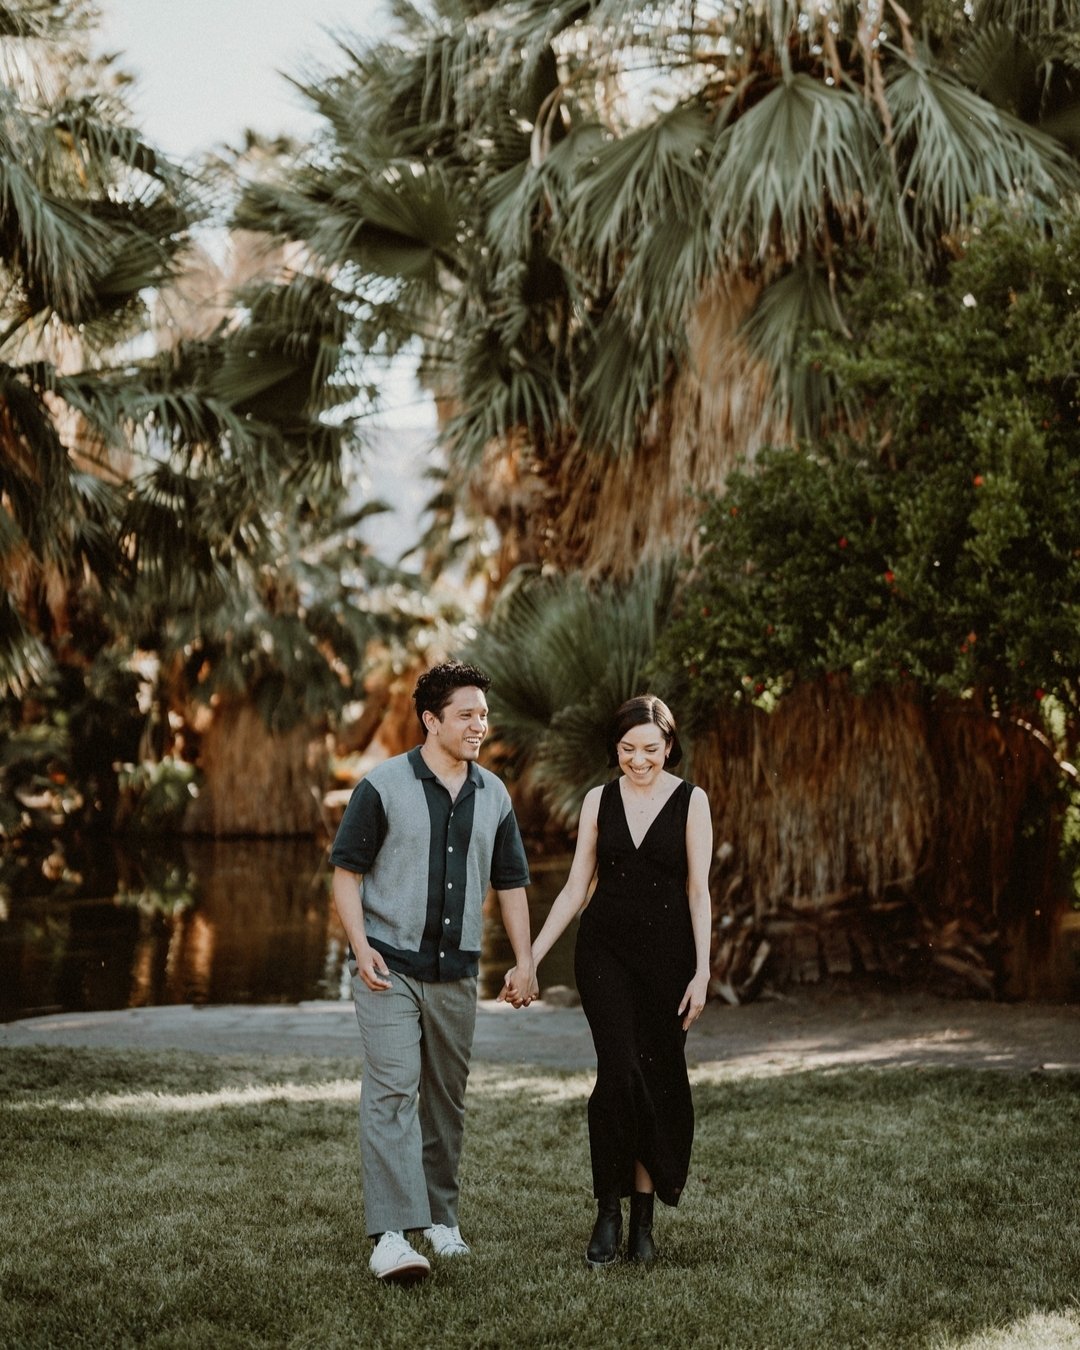 We had such a good time with Diana and Jonny. I think we spent more time laughing and chatting than taking photos! 

#jennandpawelphotography #jennandpawel #scbmember #pawel_paparazzo #lettheadventurebegin #adventurecouple #engagementphotography #eng